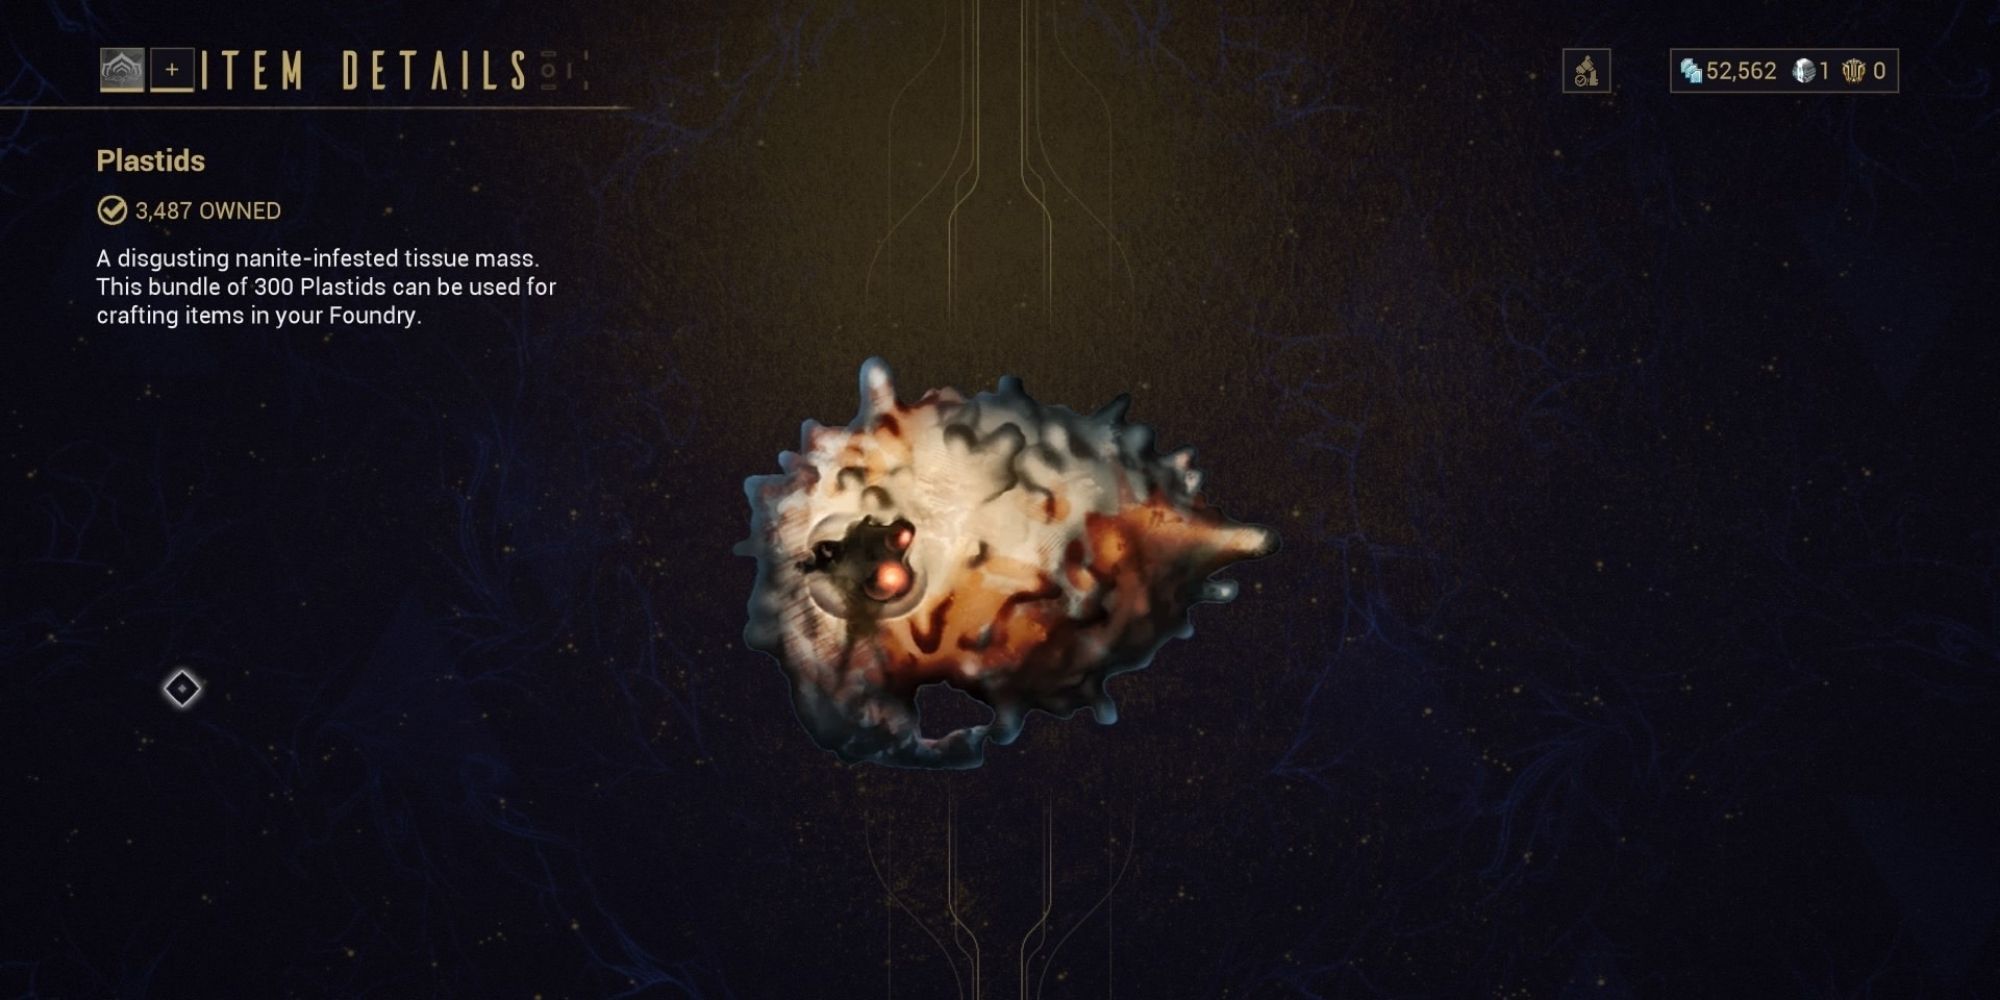 The Plastids resource preview on Warframe.